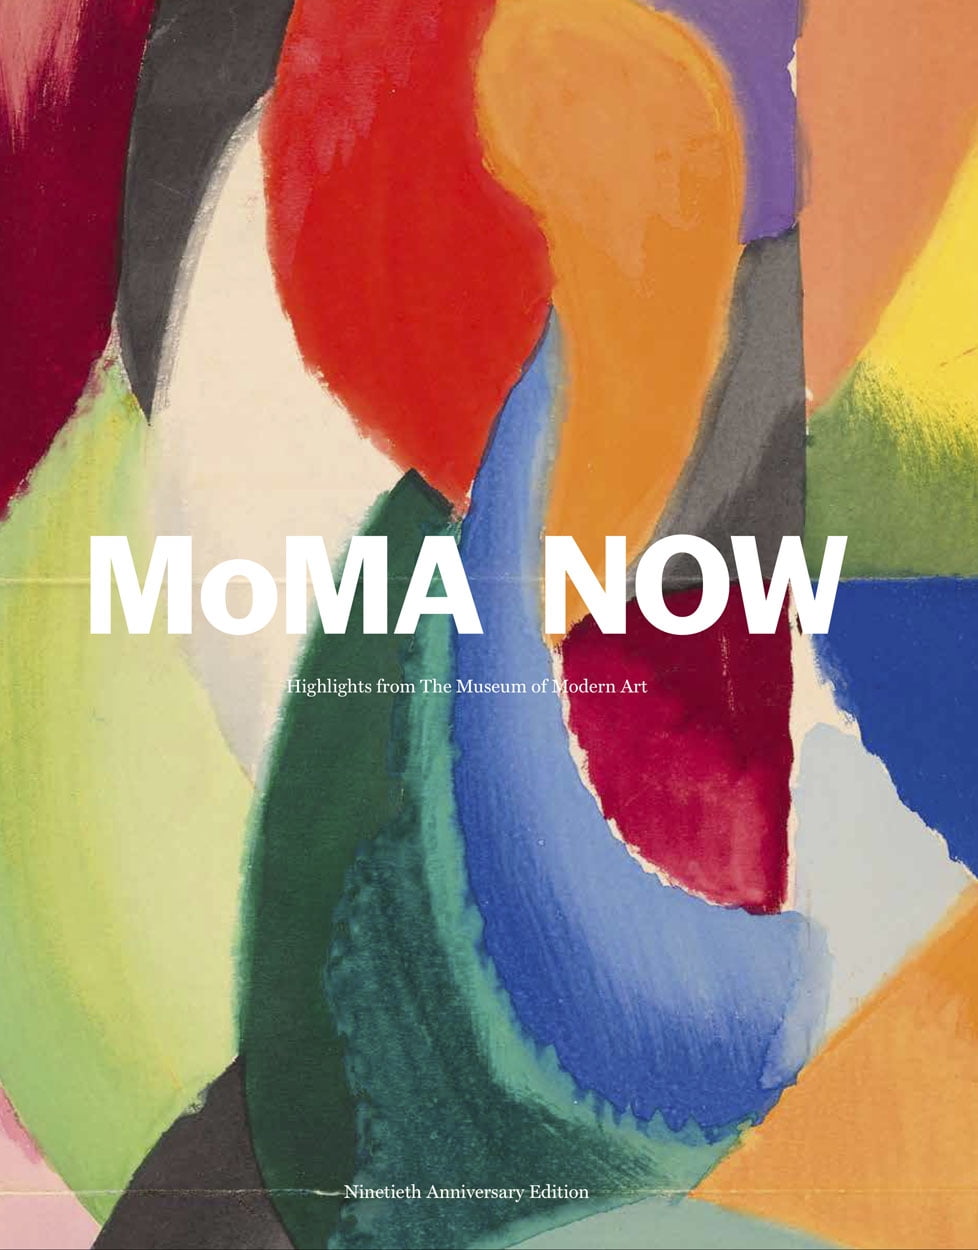 Moma Now Highlights from Museum of Modern New York (Hardcover) - Walmart.com